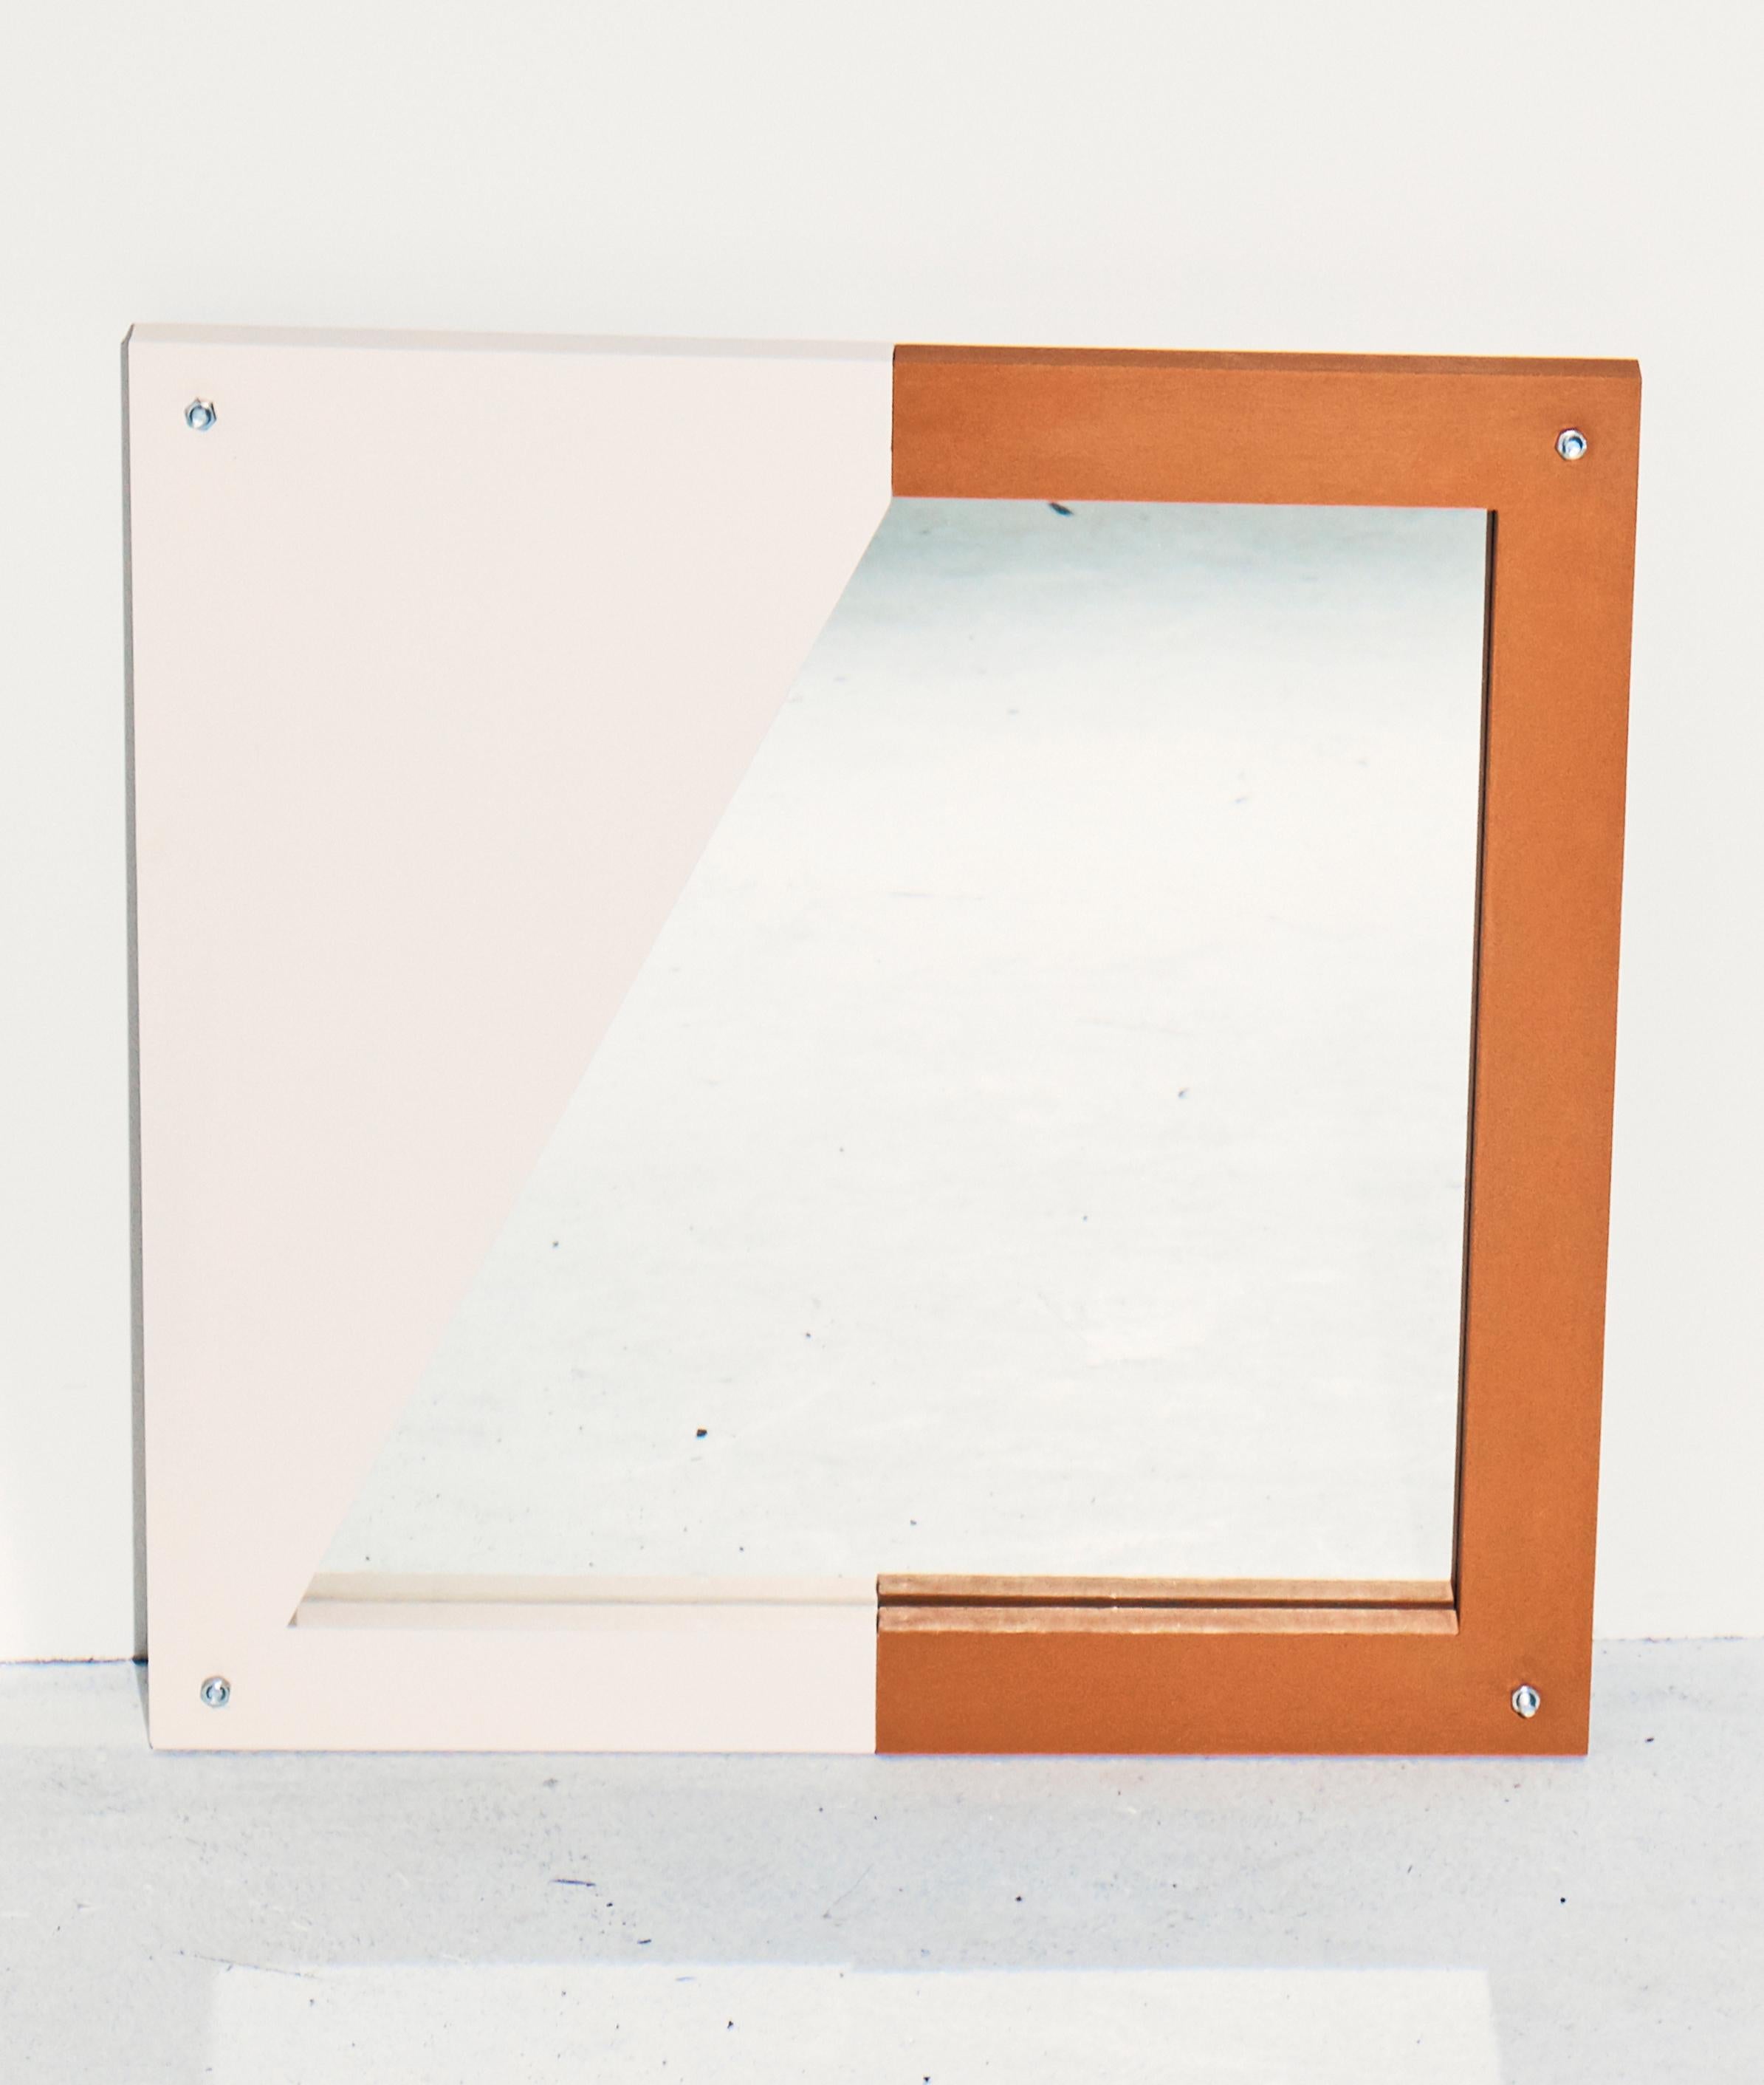 Mould mirror I by Theodora Alfredsdottir.
Unique piece
Materials: MDF
Dimensions: 40 x 40 x 3 cm.

Theodora Alfredsdottir is a product design studio based in London. 
Theodora is an Icelandic product designer. She holds a bachelor’s degree in